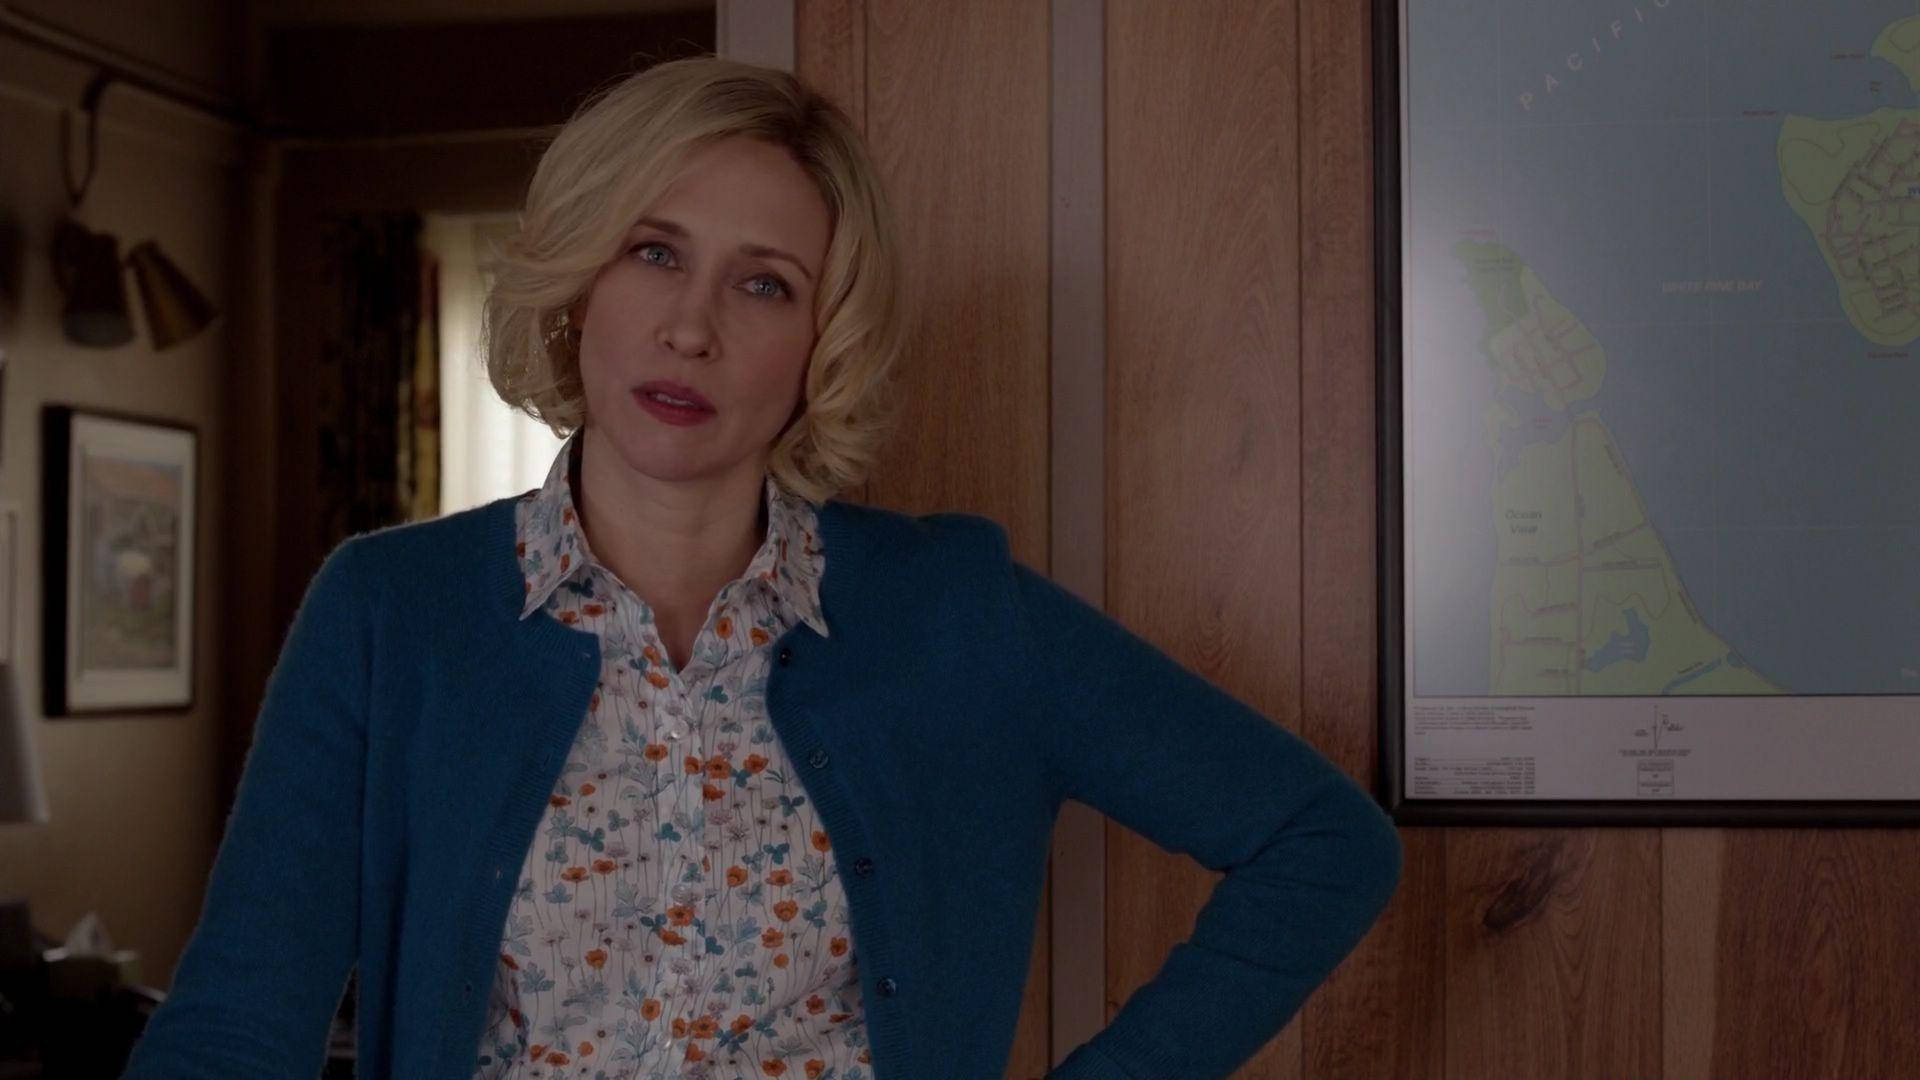 Intense Scene From The Bates Motel Series Featuring Norma Bates.